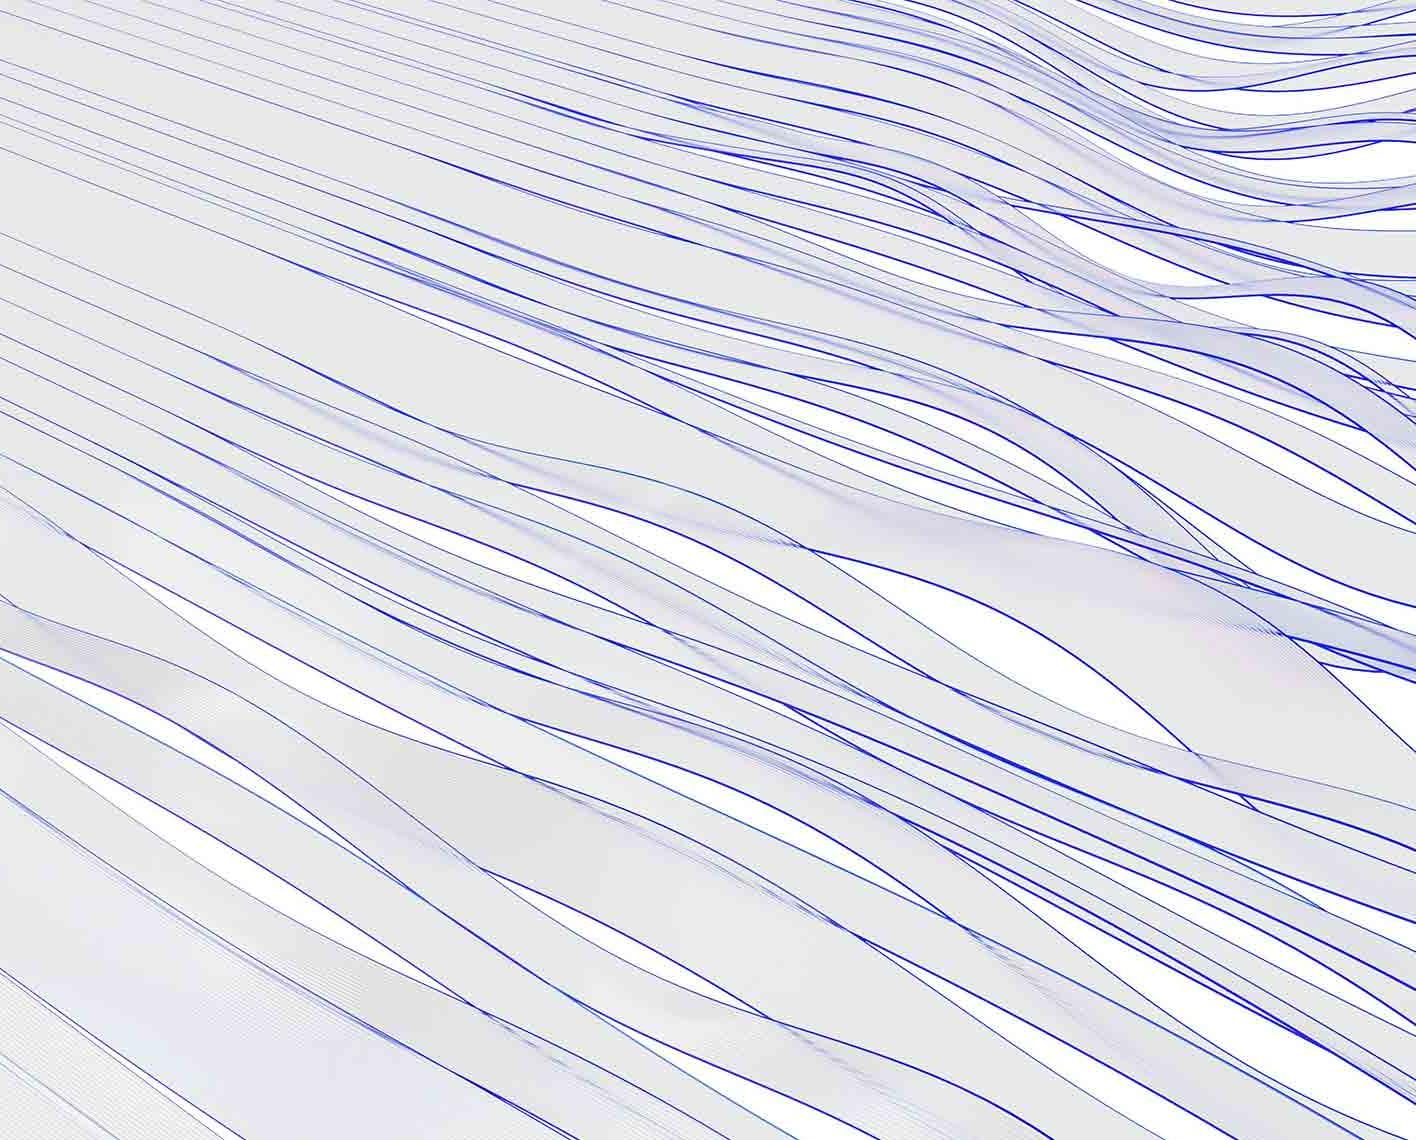 Concept art showing wavy blue lines representing multiple data channels.